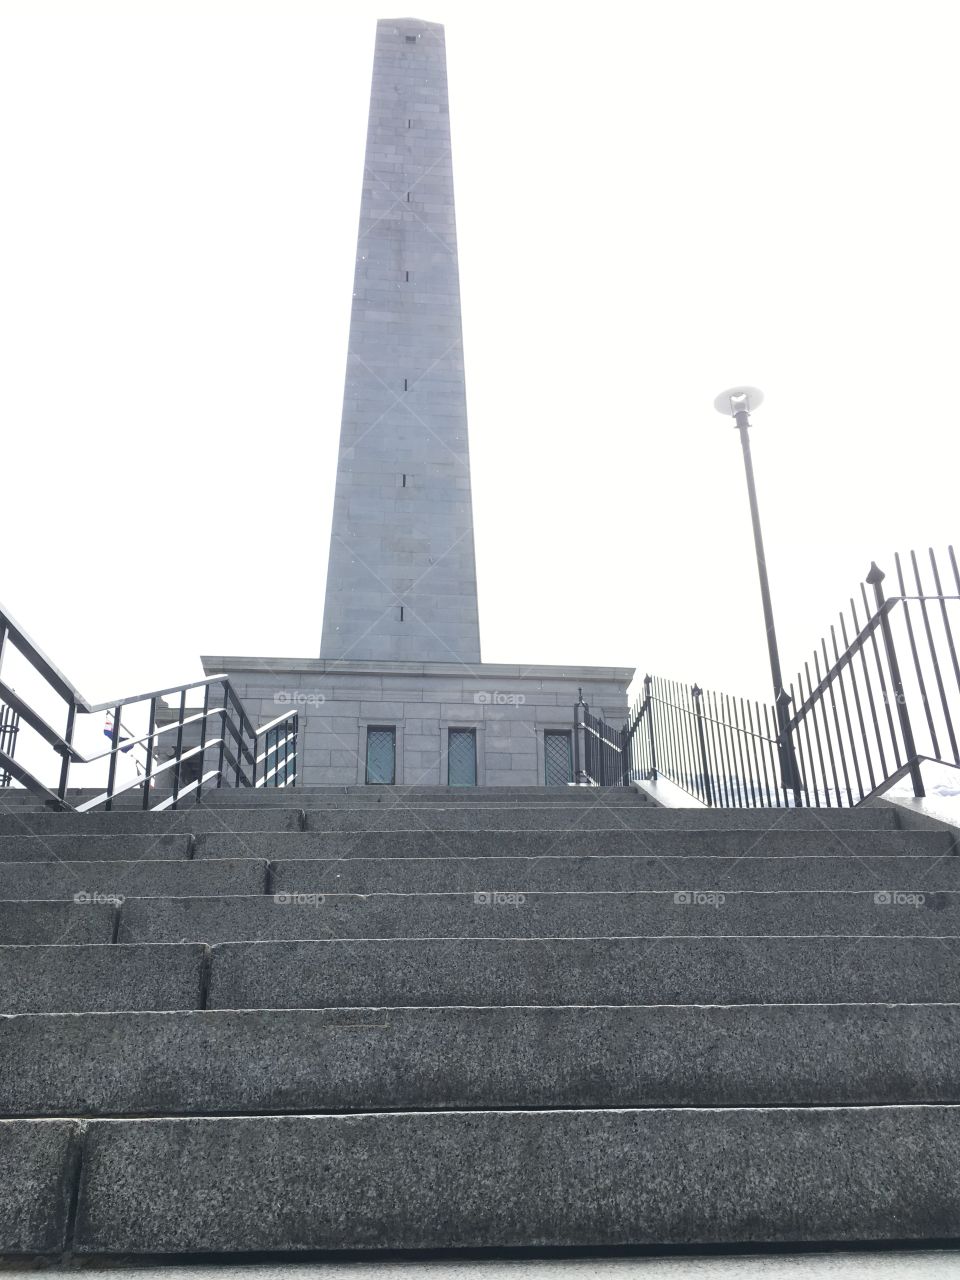 The historical Bunker Hill monument in Charlestown, Massachusetts, stands tall with pride!